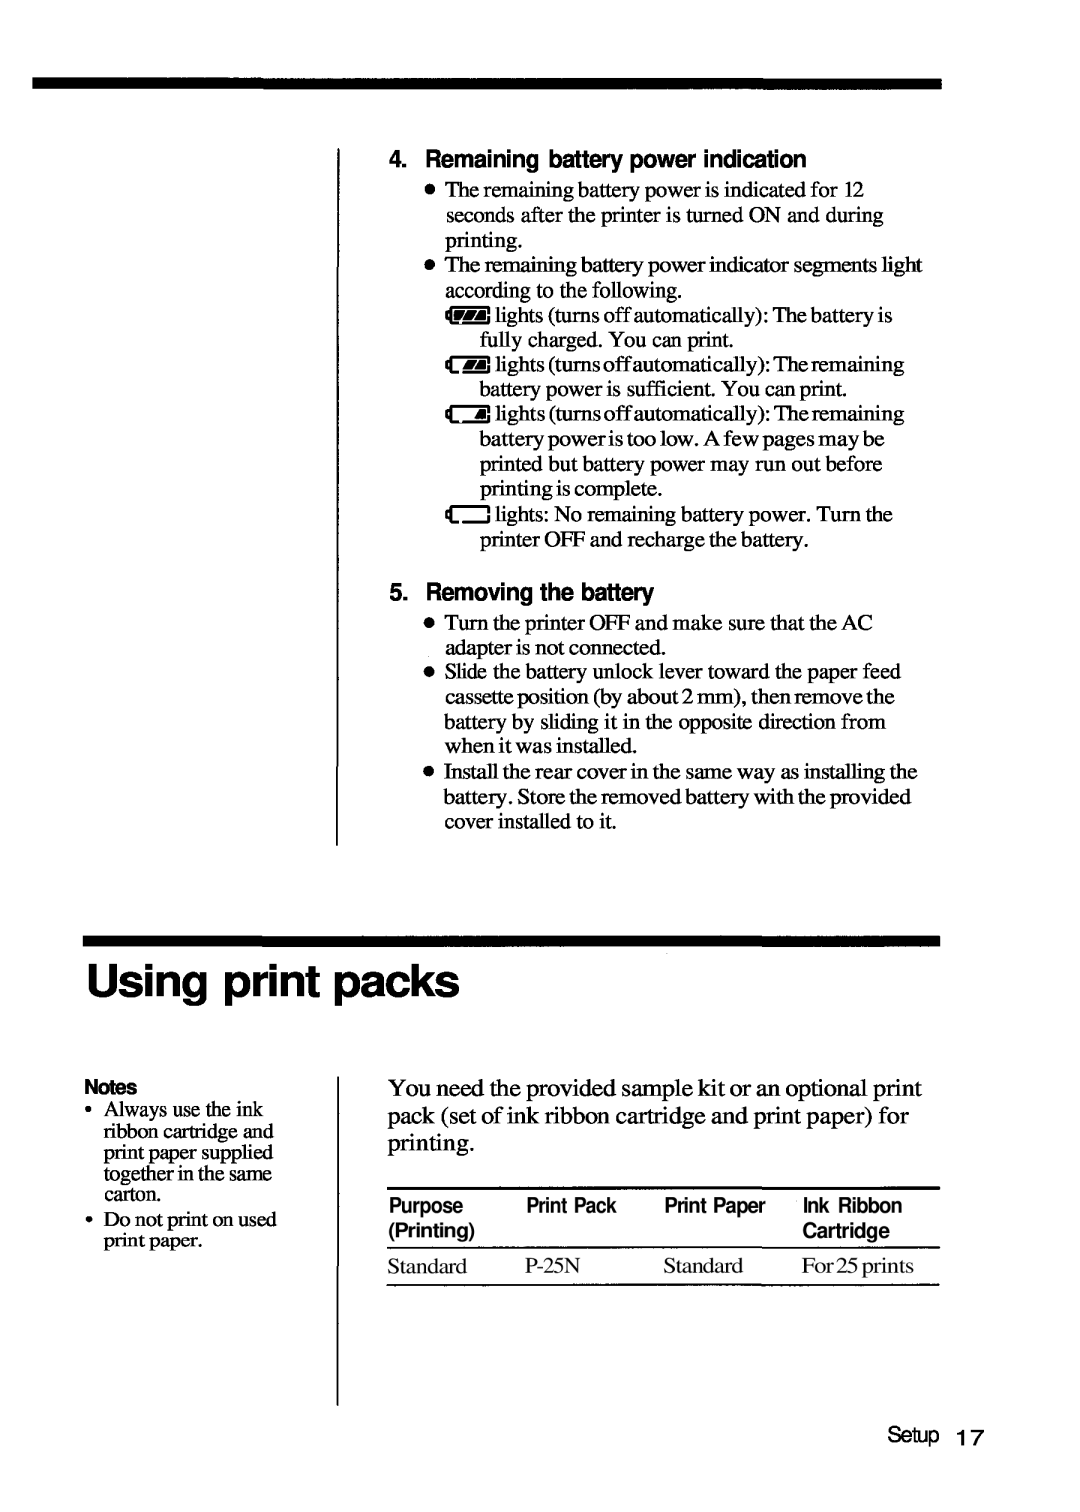 Olympus P-200 Using print packs, Remaining battery power indication, Removing the battery, Standard, P-25N, For25prints 